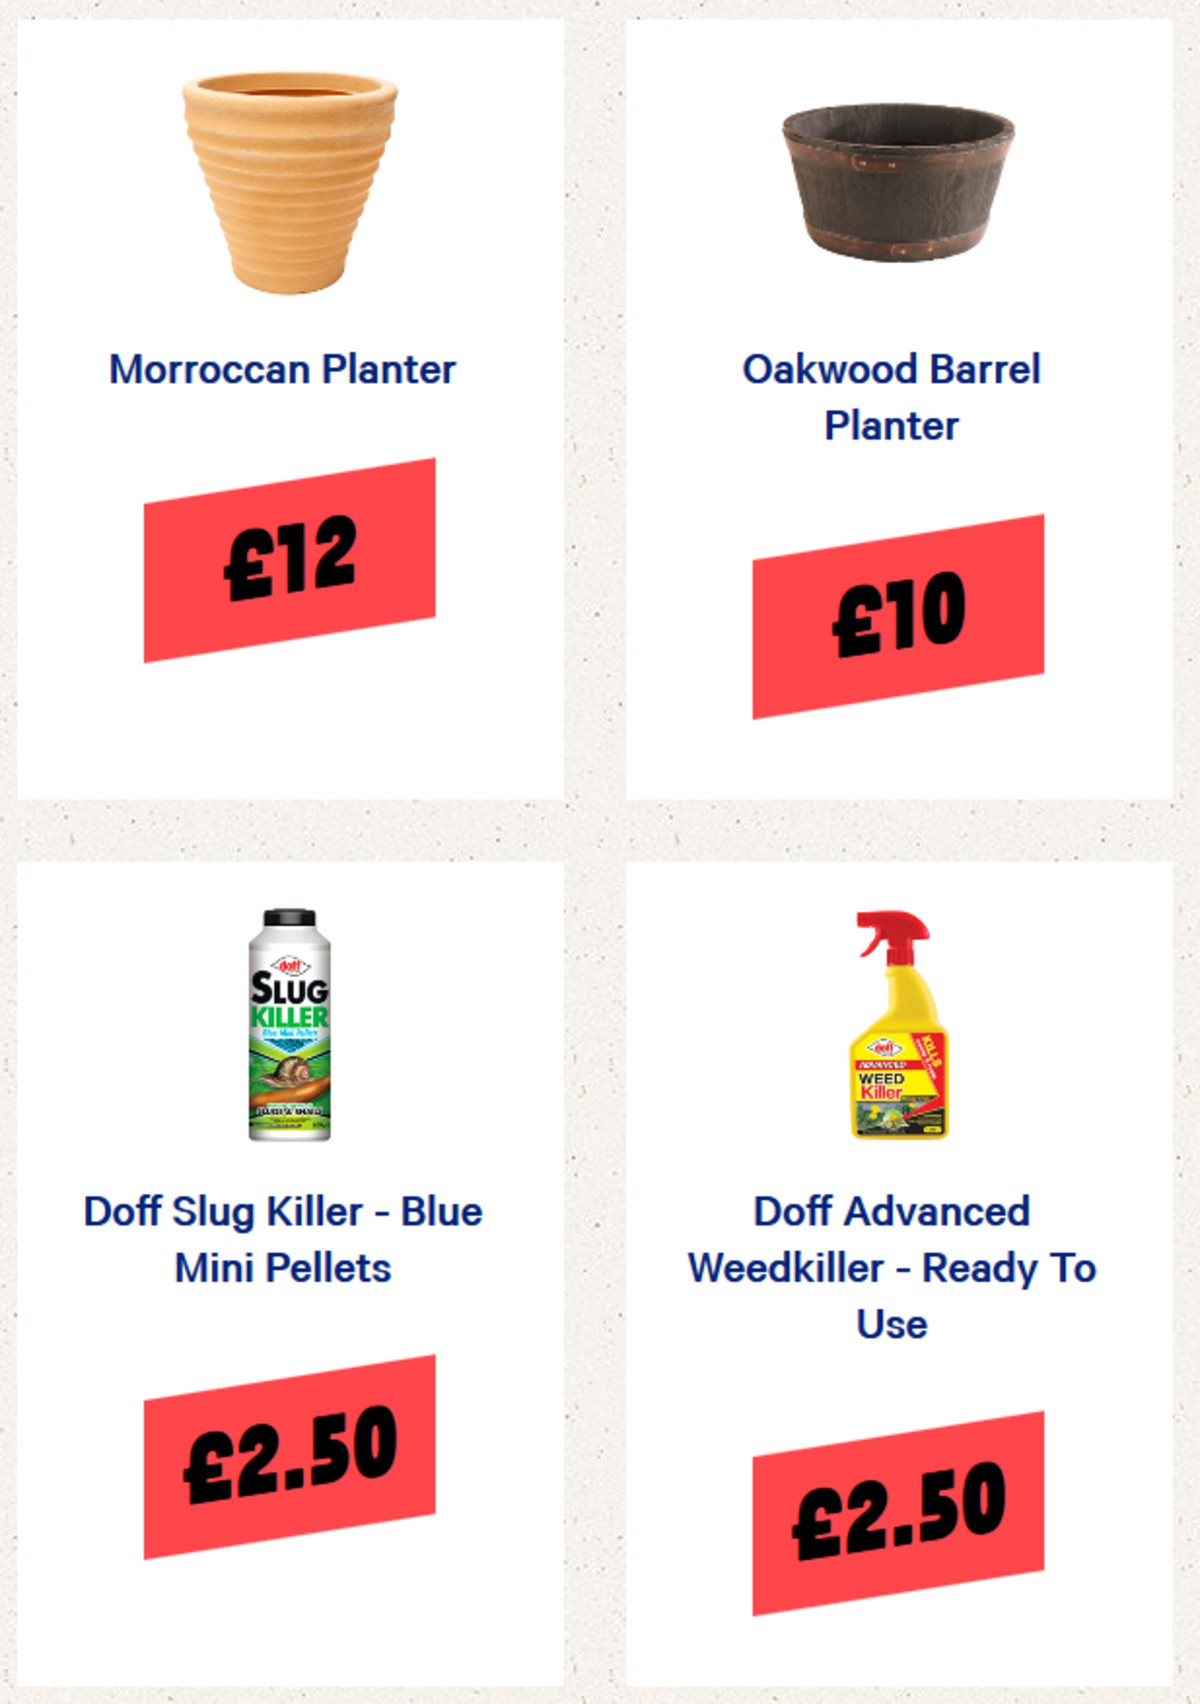 Jack's Offers from 27 March